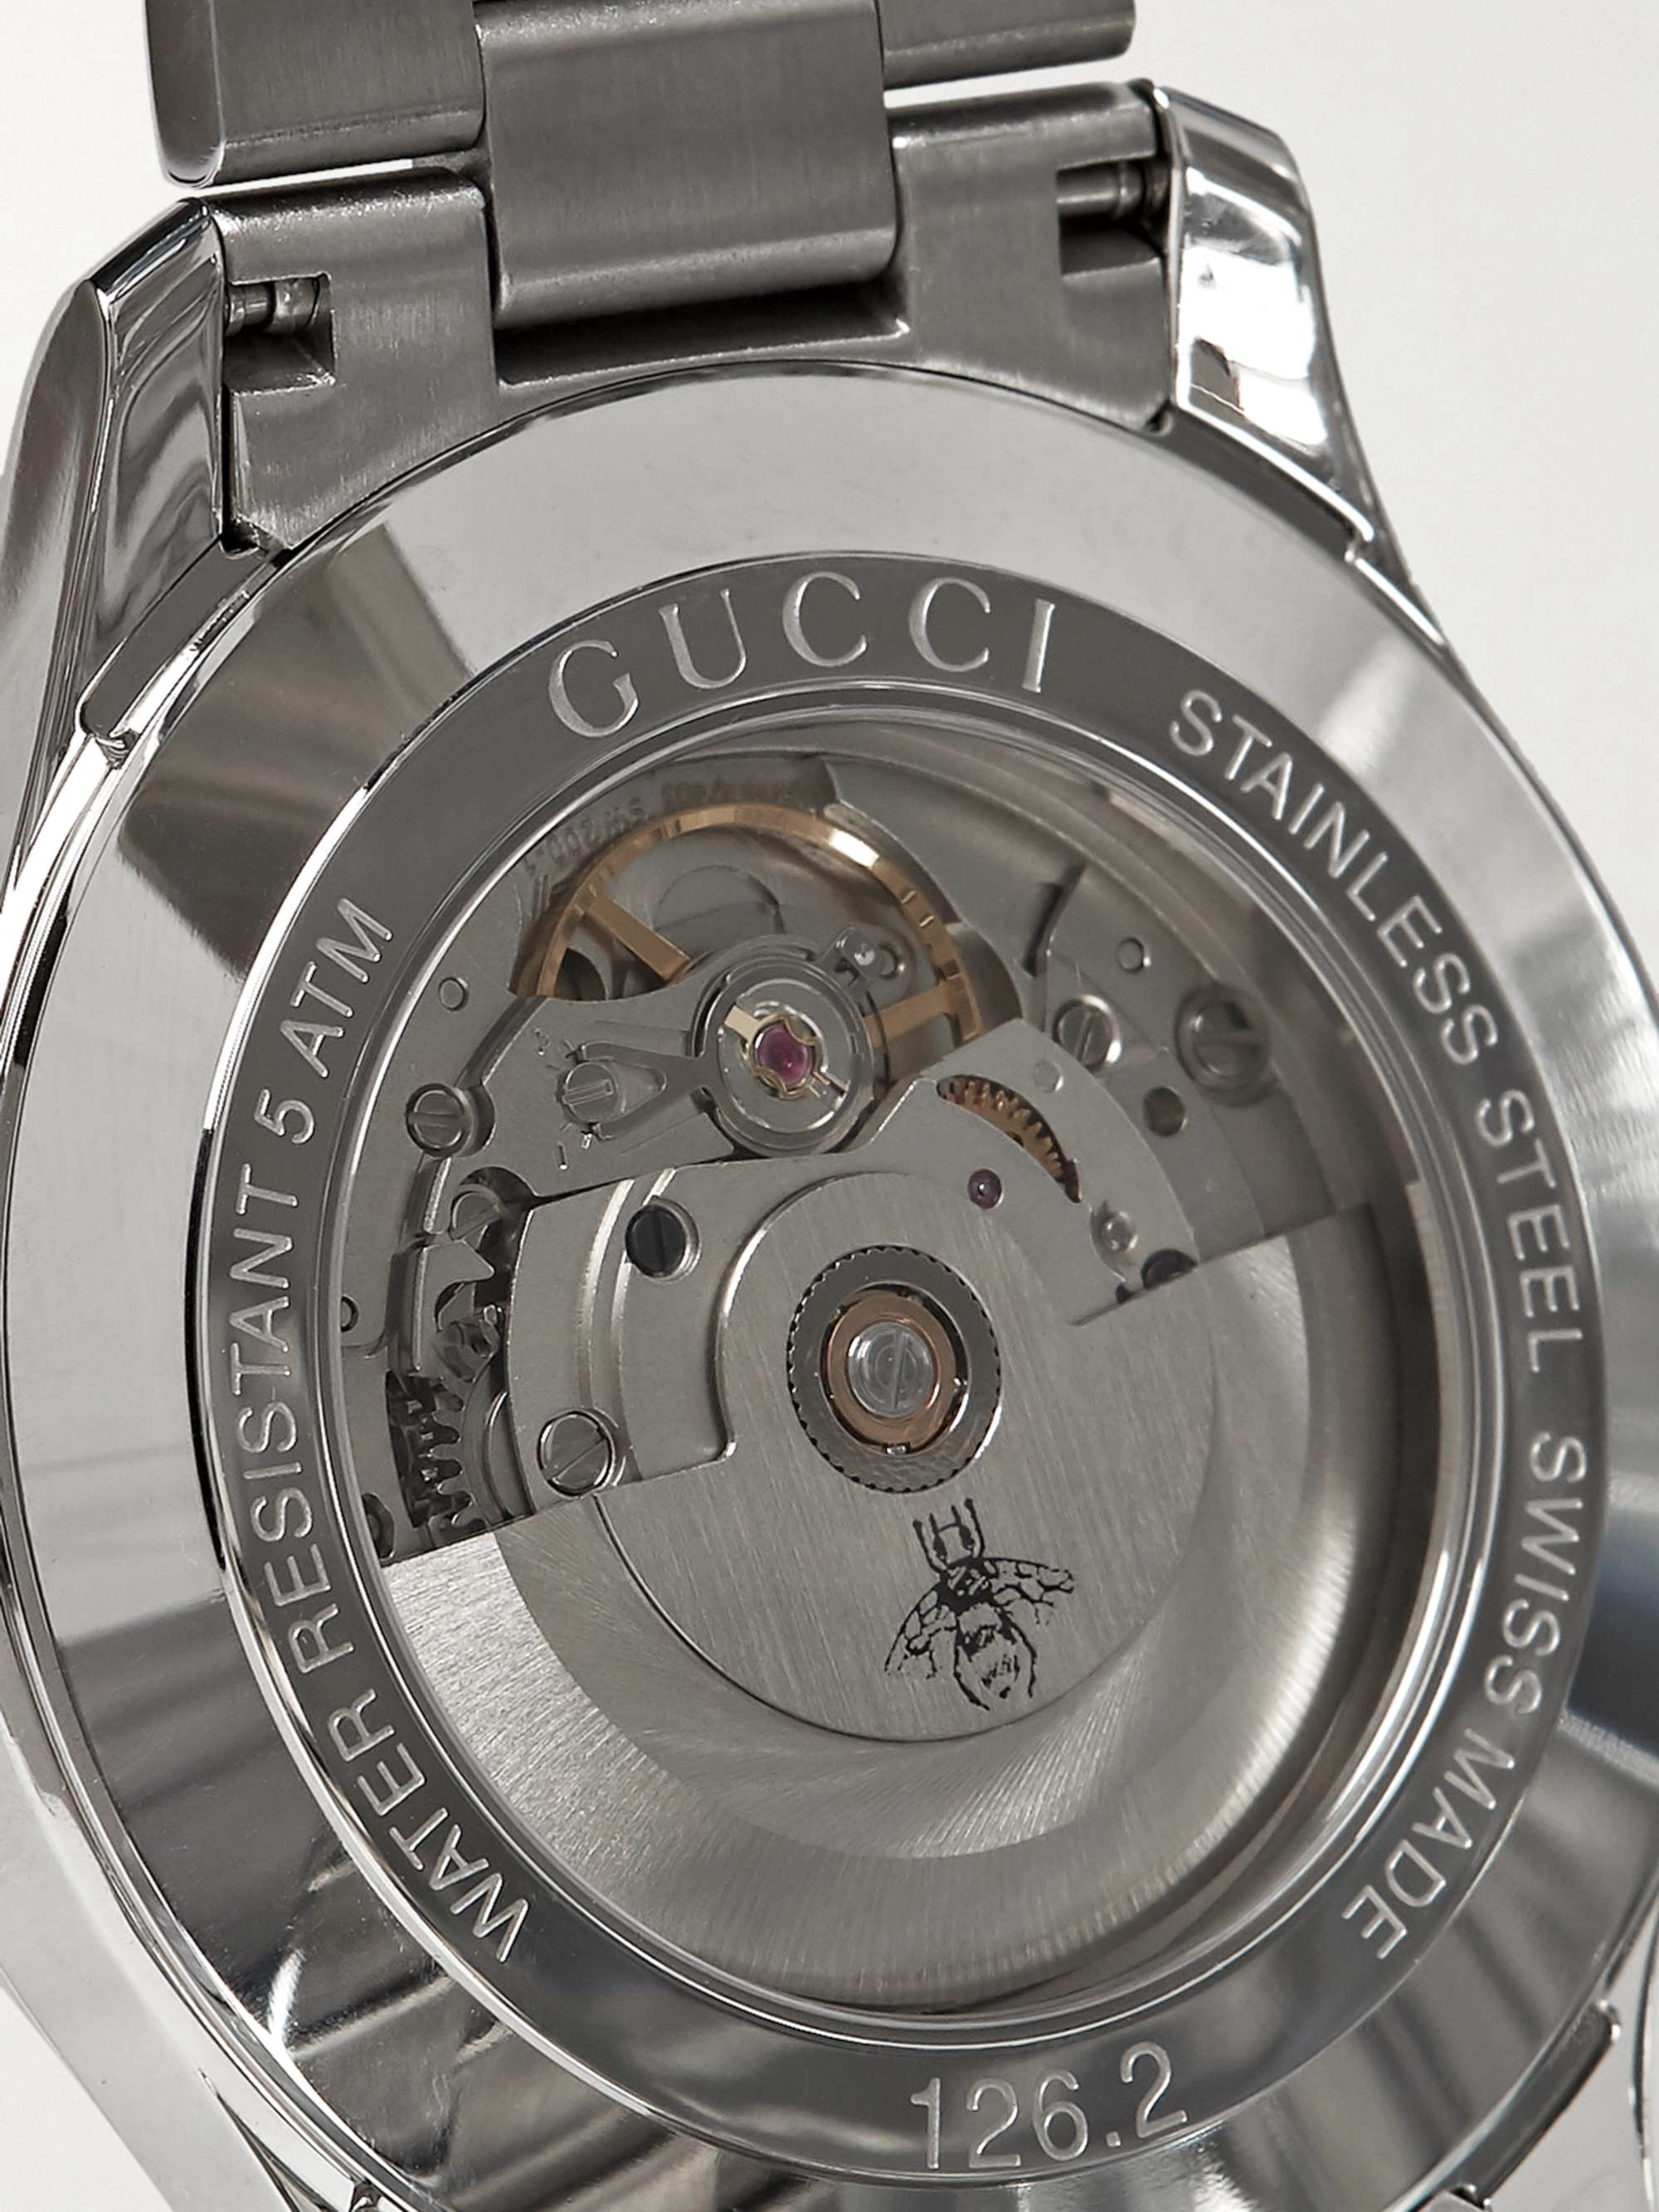 GUCCI G-Timeless 42mm Stainless Steel Watch